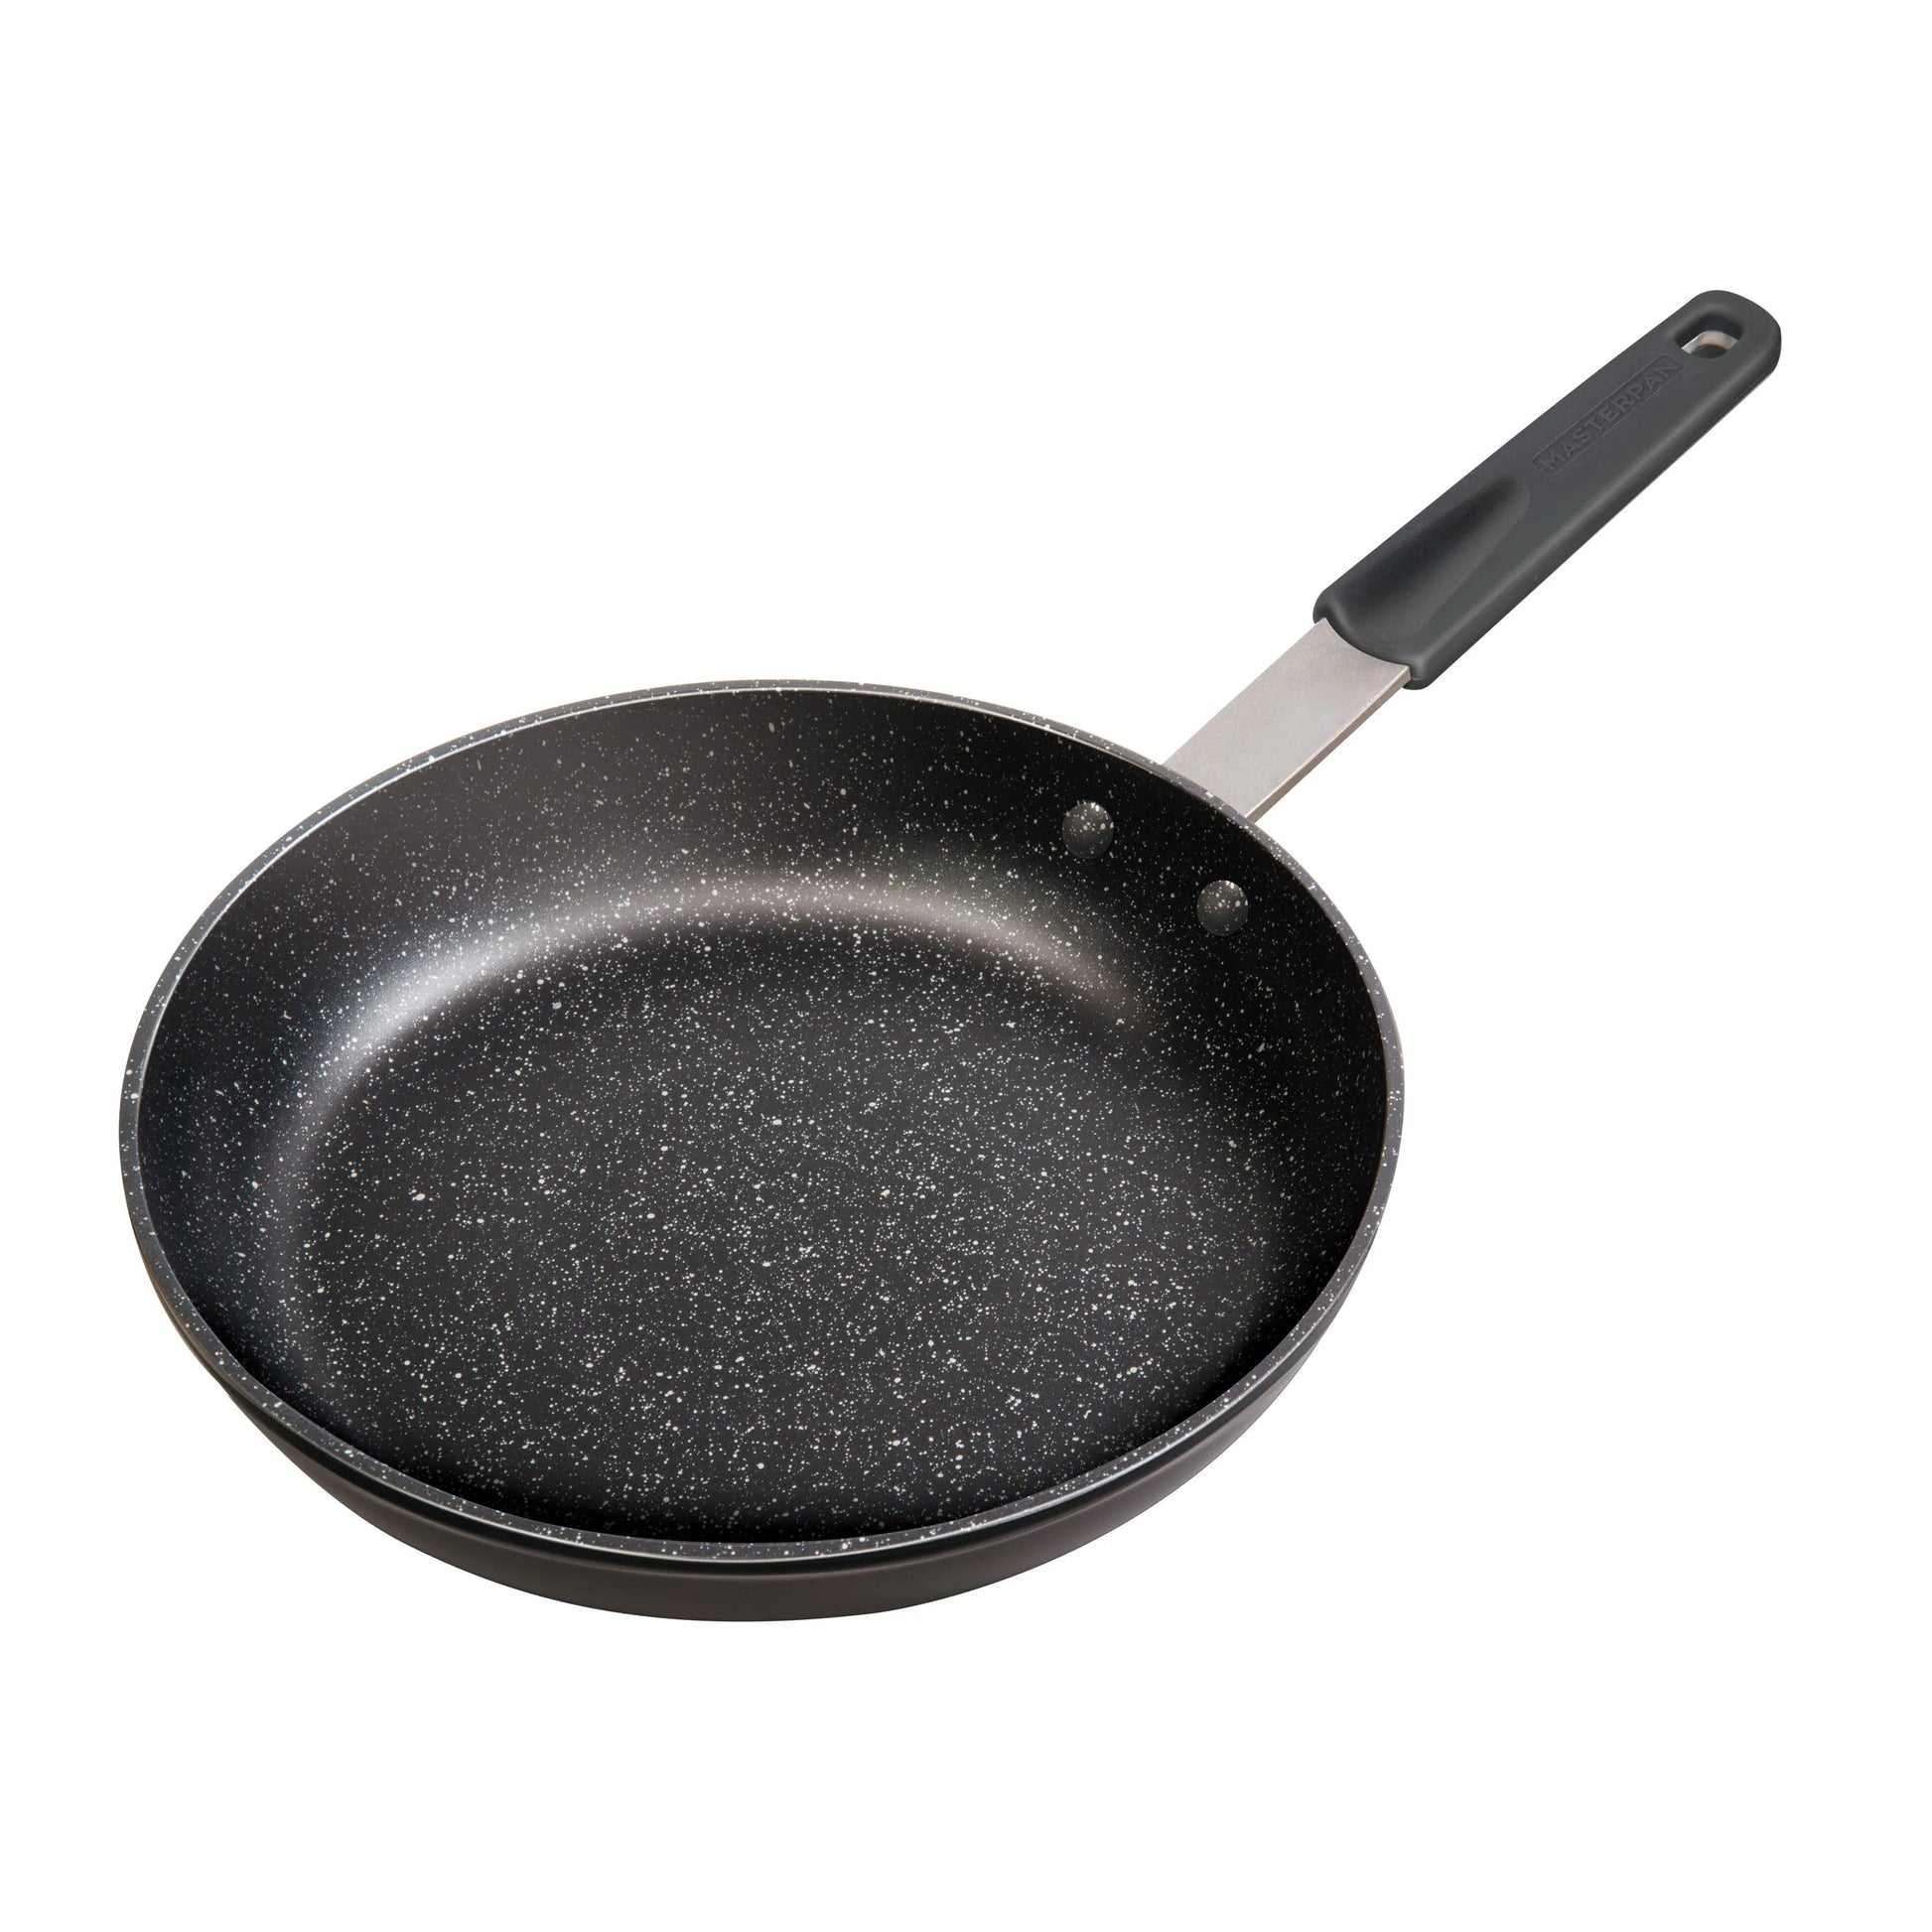 https://kitchenoasis.com/cdn/shop/files/MASTERPAN-Chefs-Series-11-4-Layer-Ceramic-Re-Enforced-Non-Stick-Cast-Aluminum-Frying-Pan-and-Skillet-With-Riveted-Stainless-Steel-Handle-and-Removable-Silicone-Handle-Cover.webp?v=1685839951&width=1946